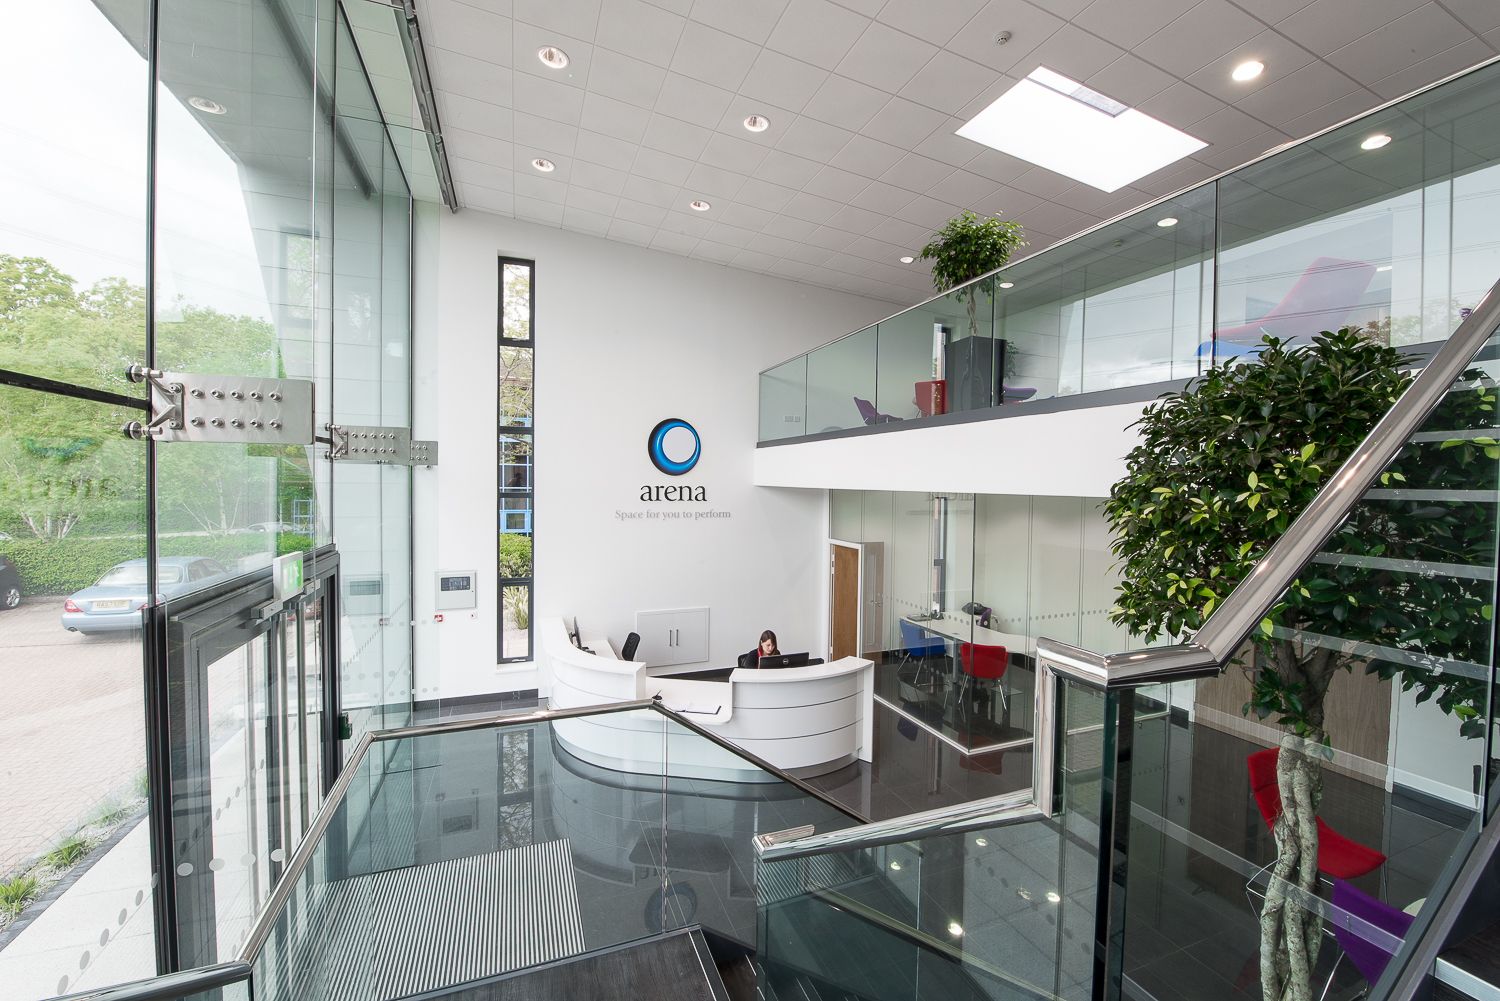 interior-photography-commercial-dorset-arena-business-centres-12.jpg